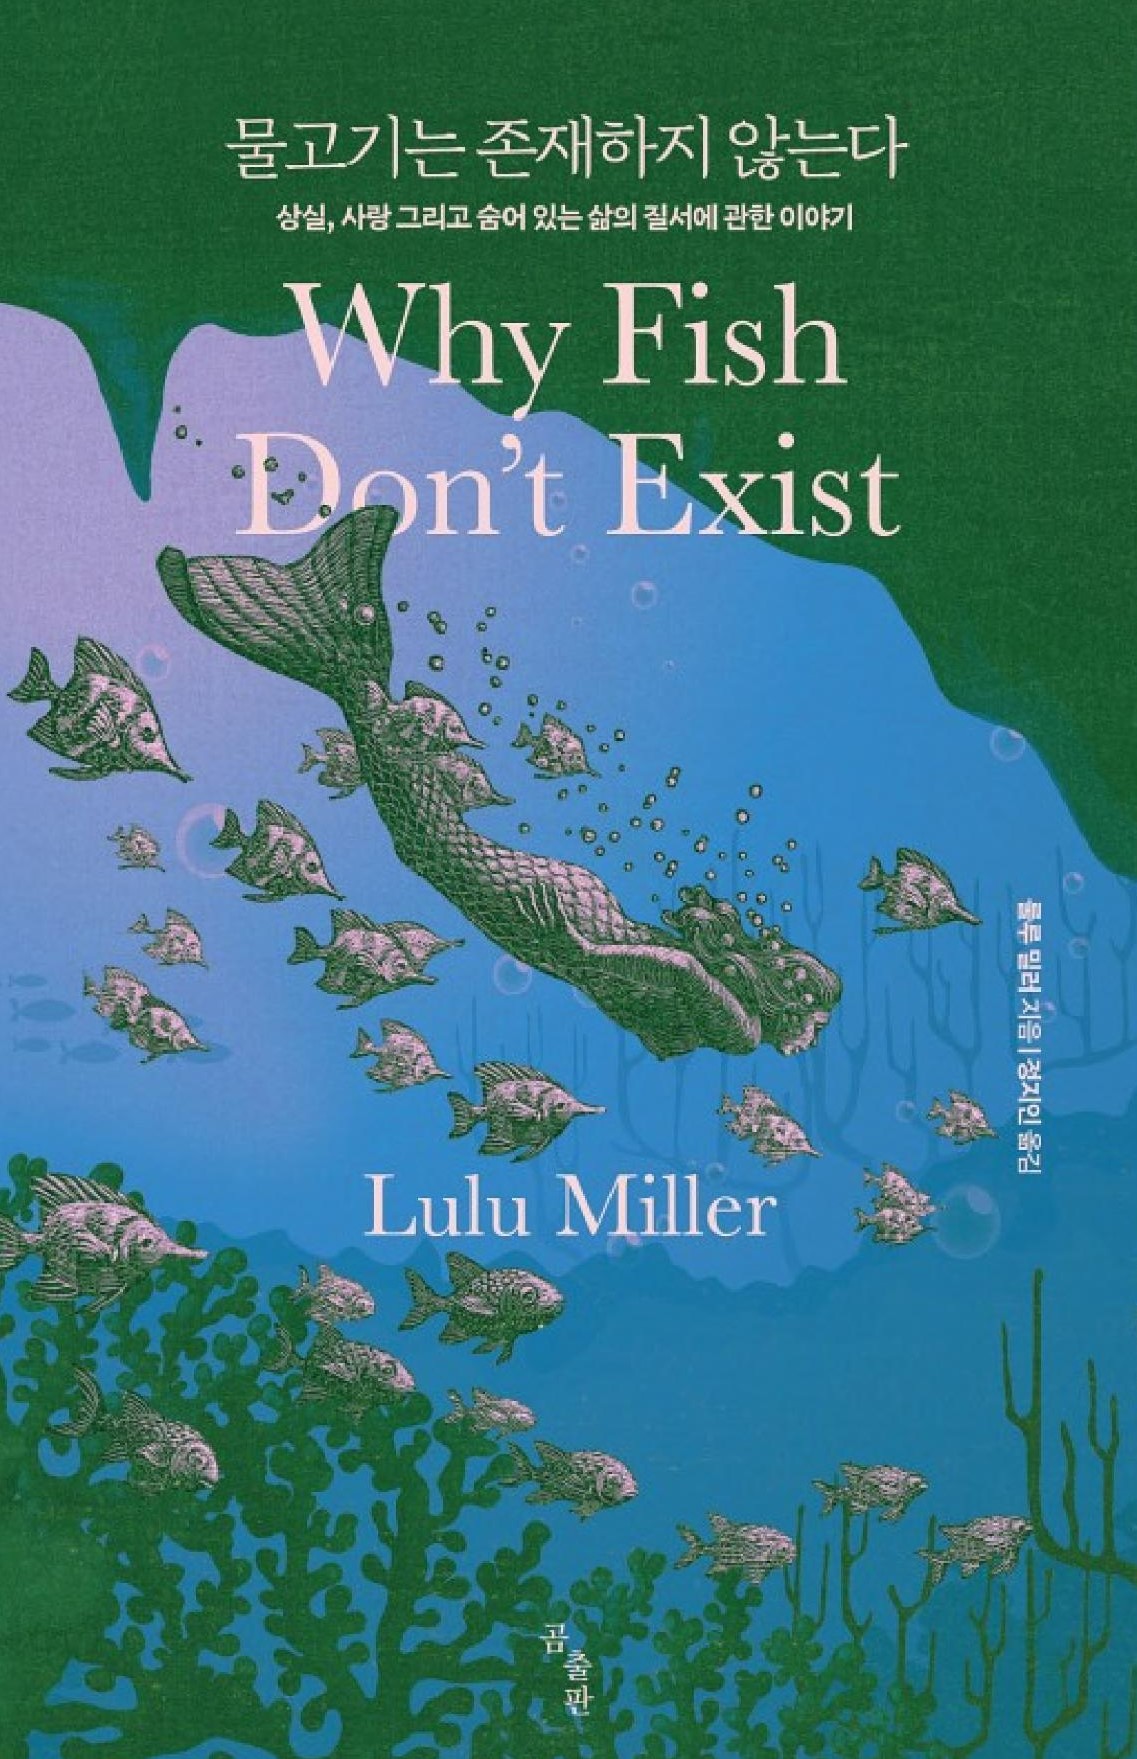 Why Fish Don’t Exist (kyobobook.co.kr)